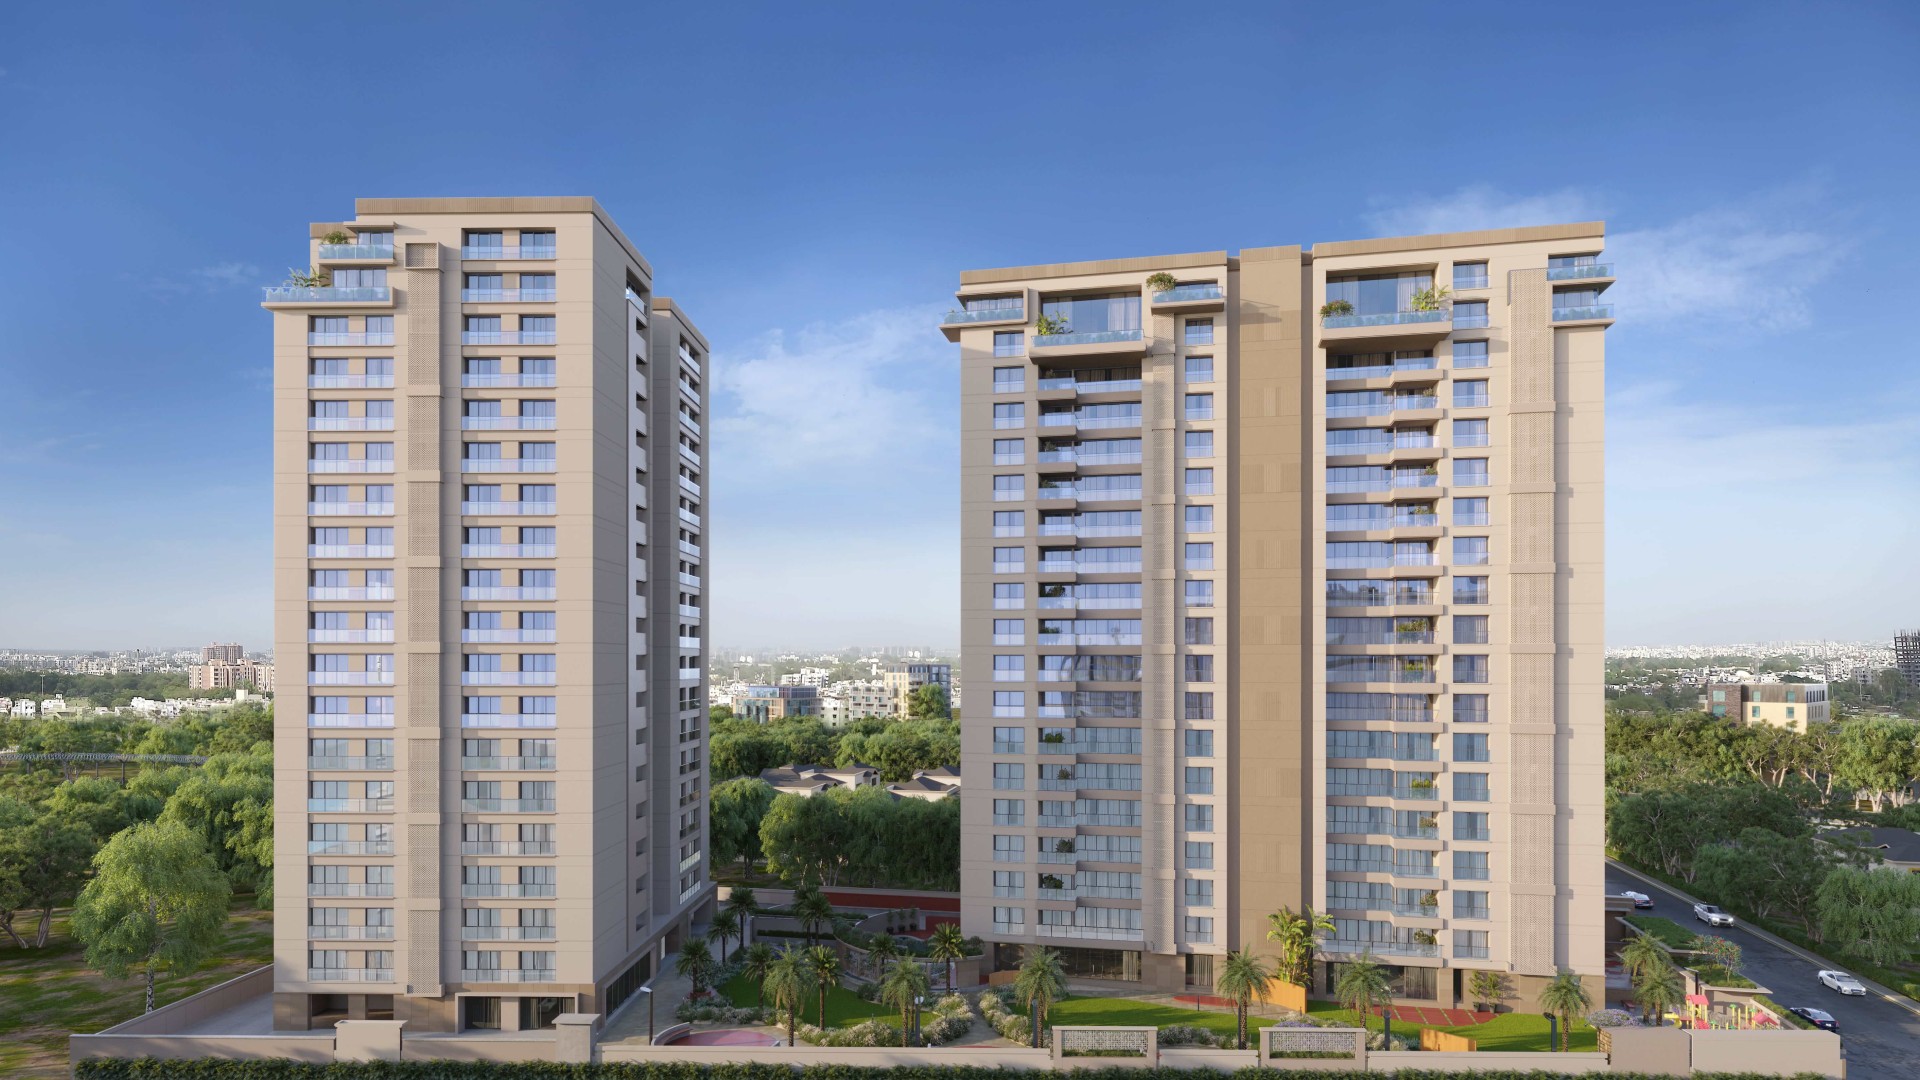 2 BHK Flats in Surat for Sale | Sangini Skyteria